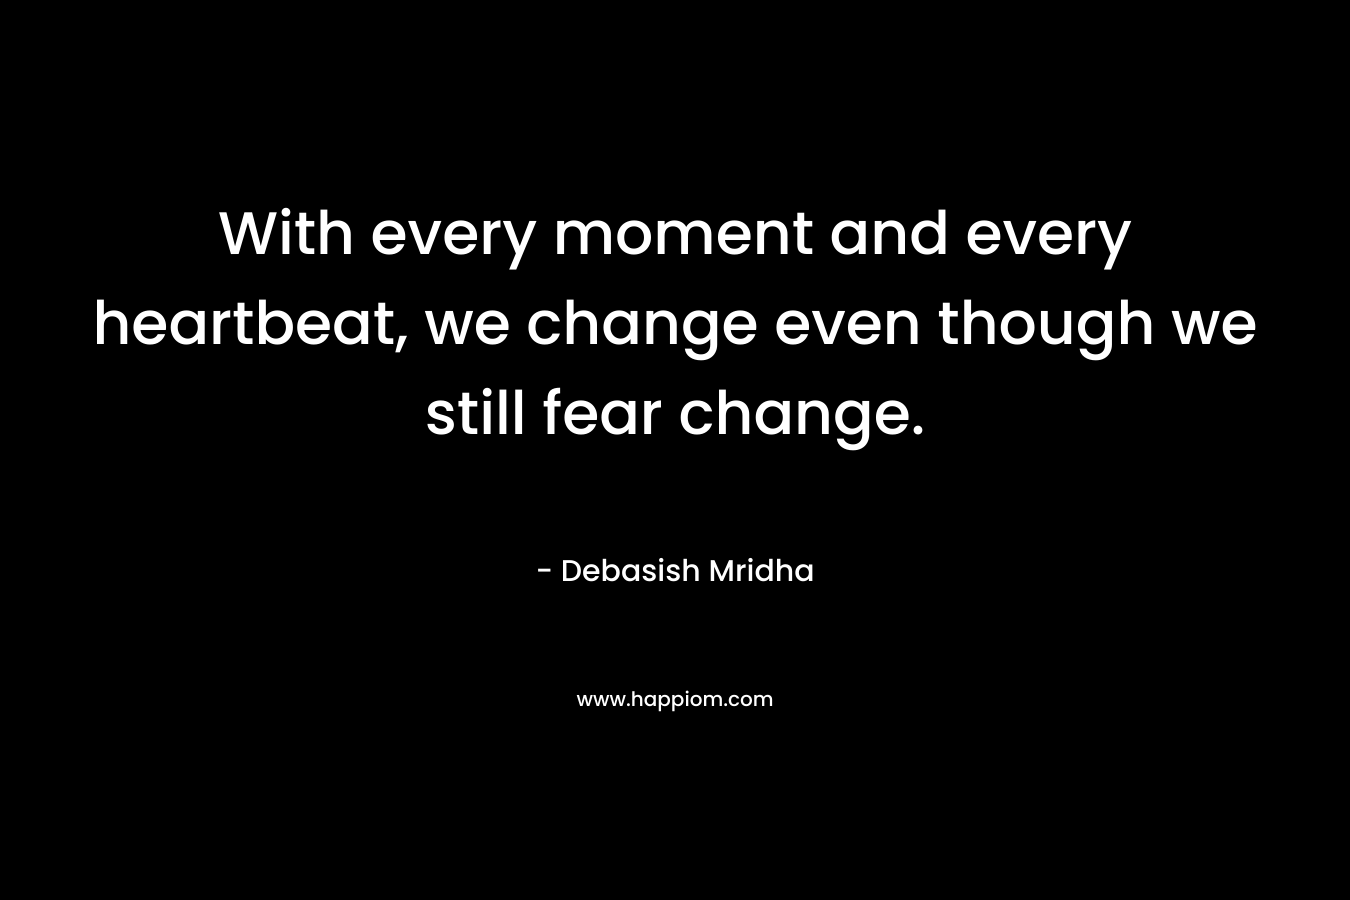 With every moment and every heartbeat, we change even though we still fear change.